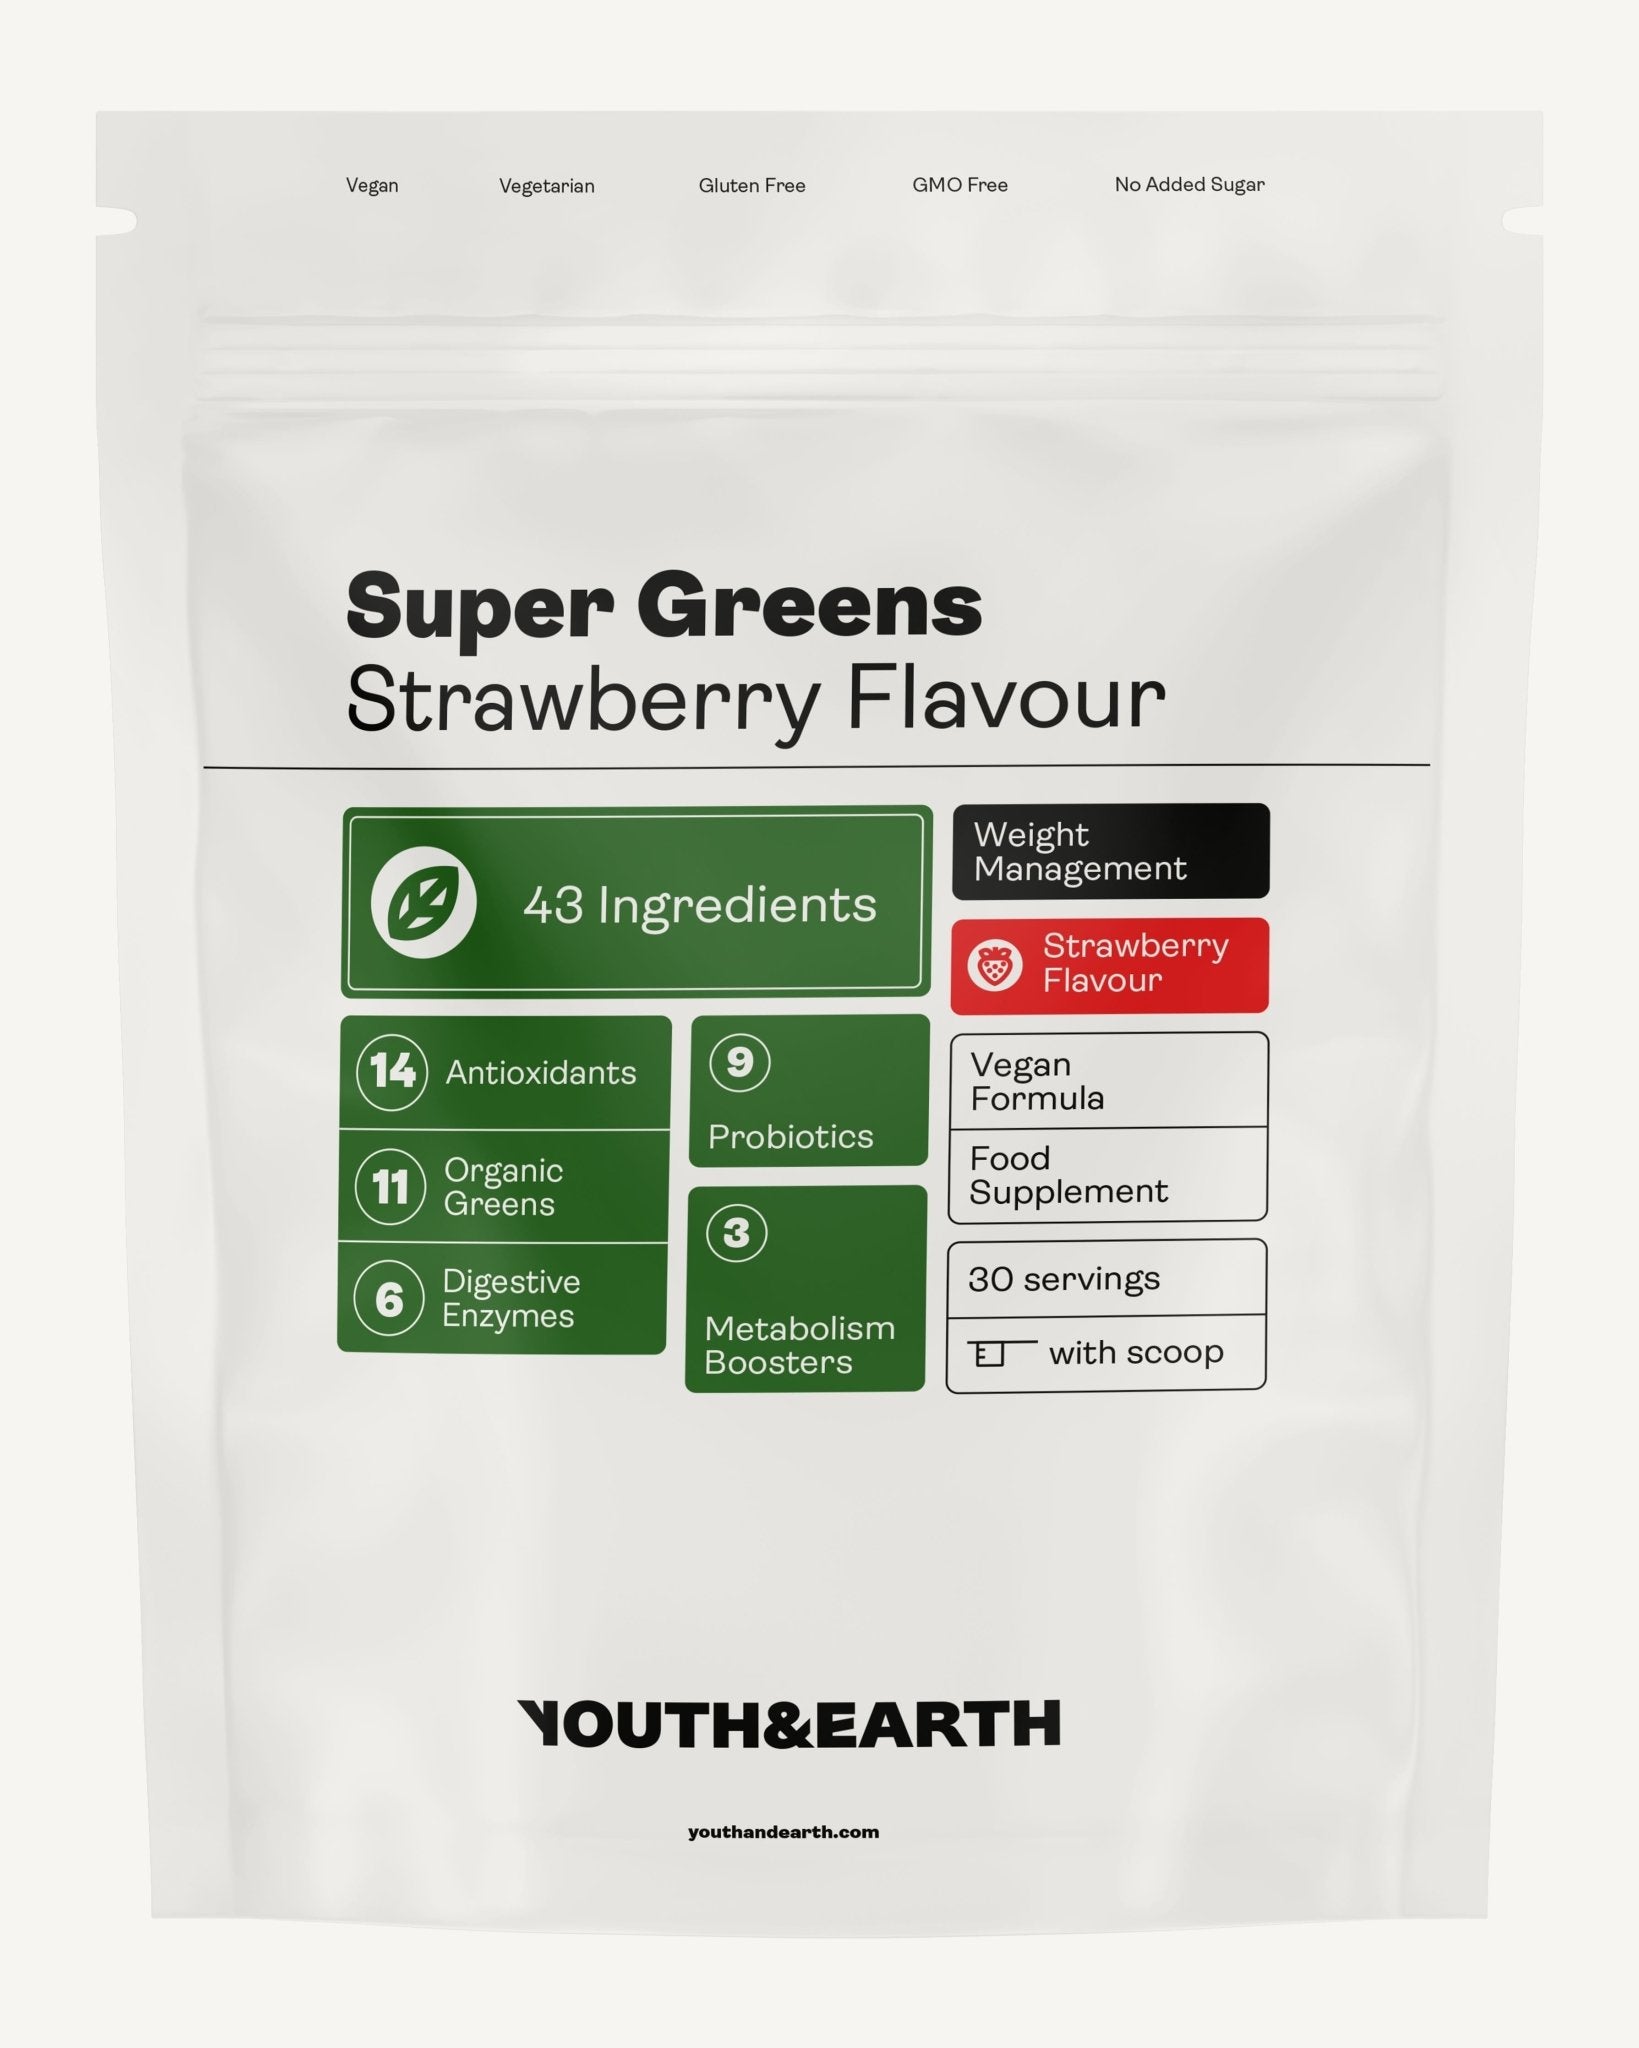 Super Greens Weight Management Formula Strawberry Flavour 267g x 30 servings - Youth & Earth EU Store